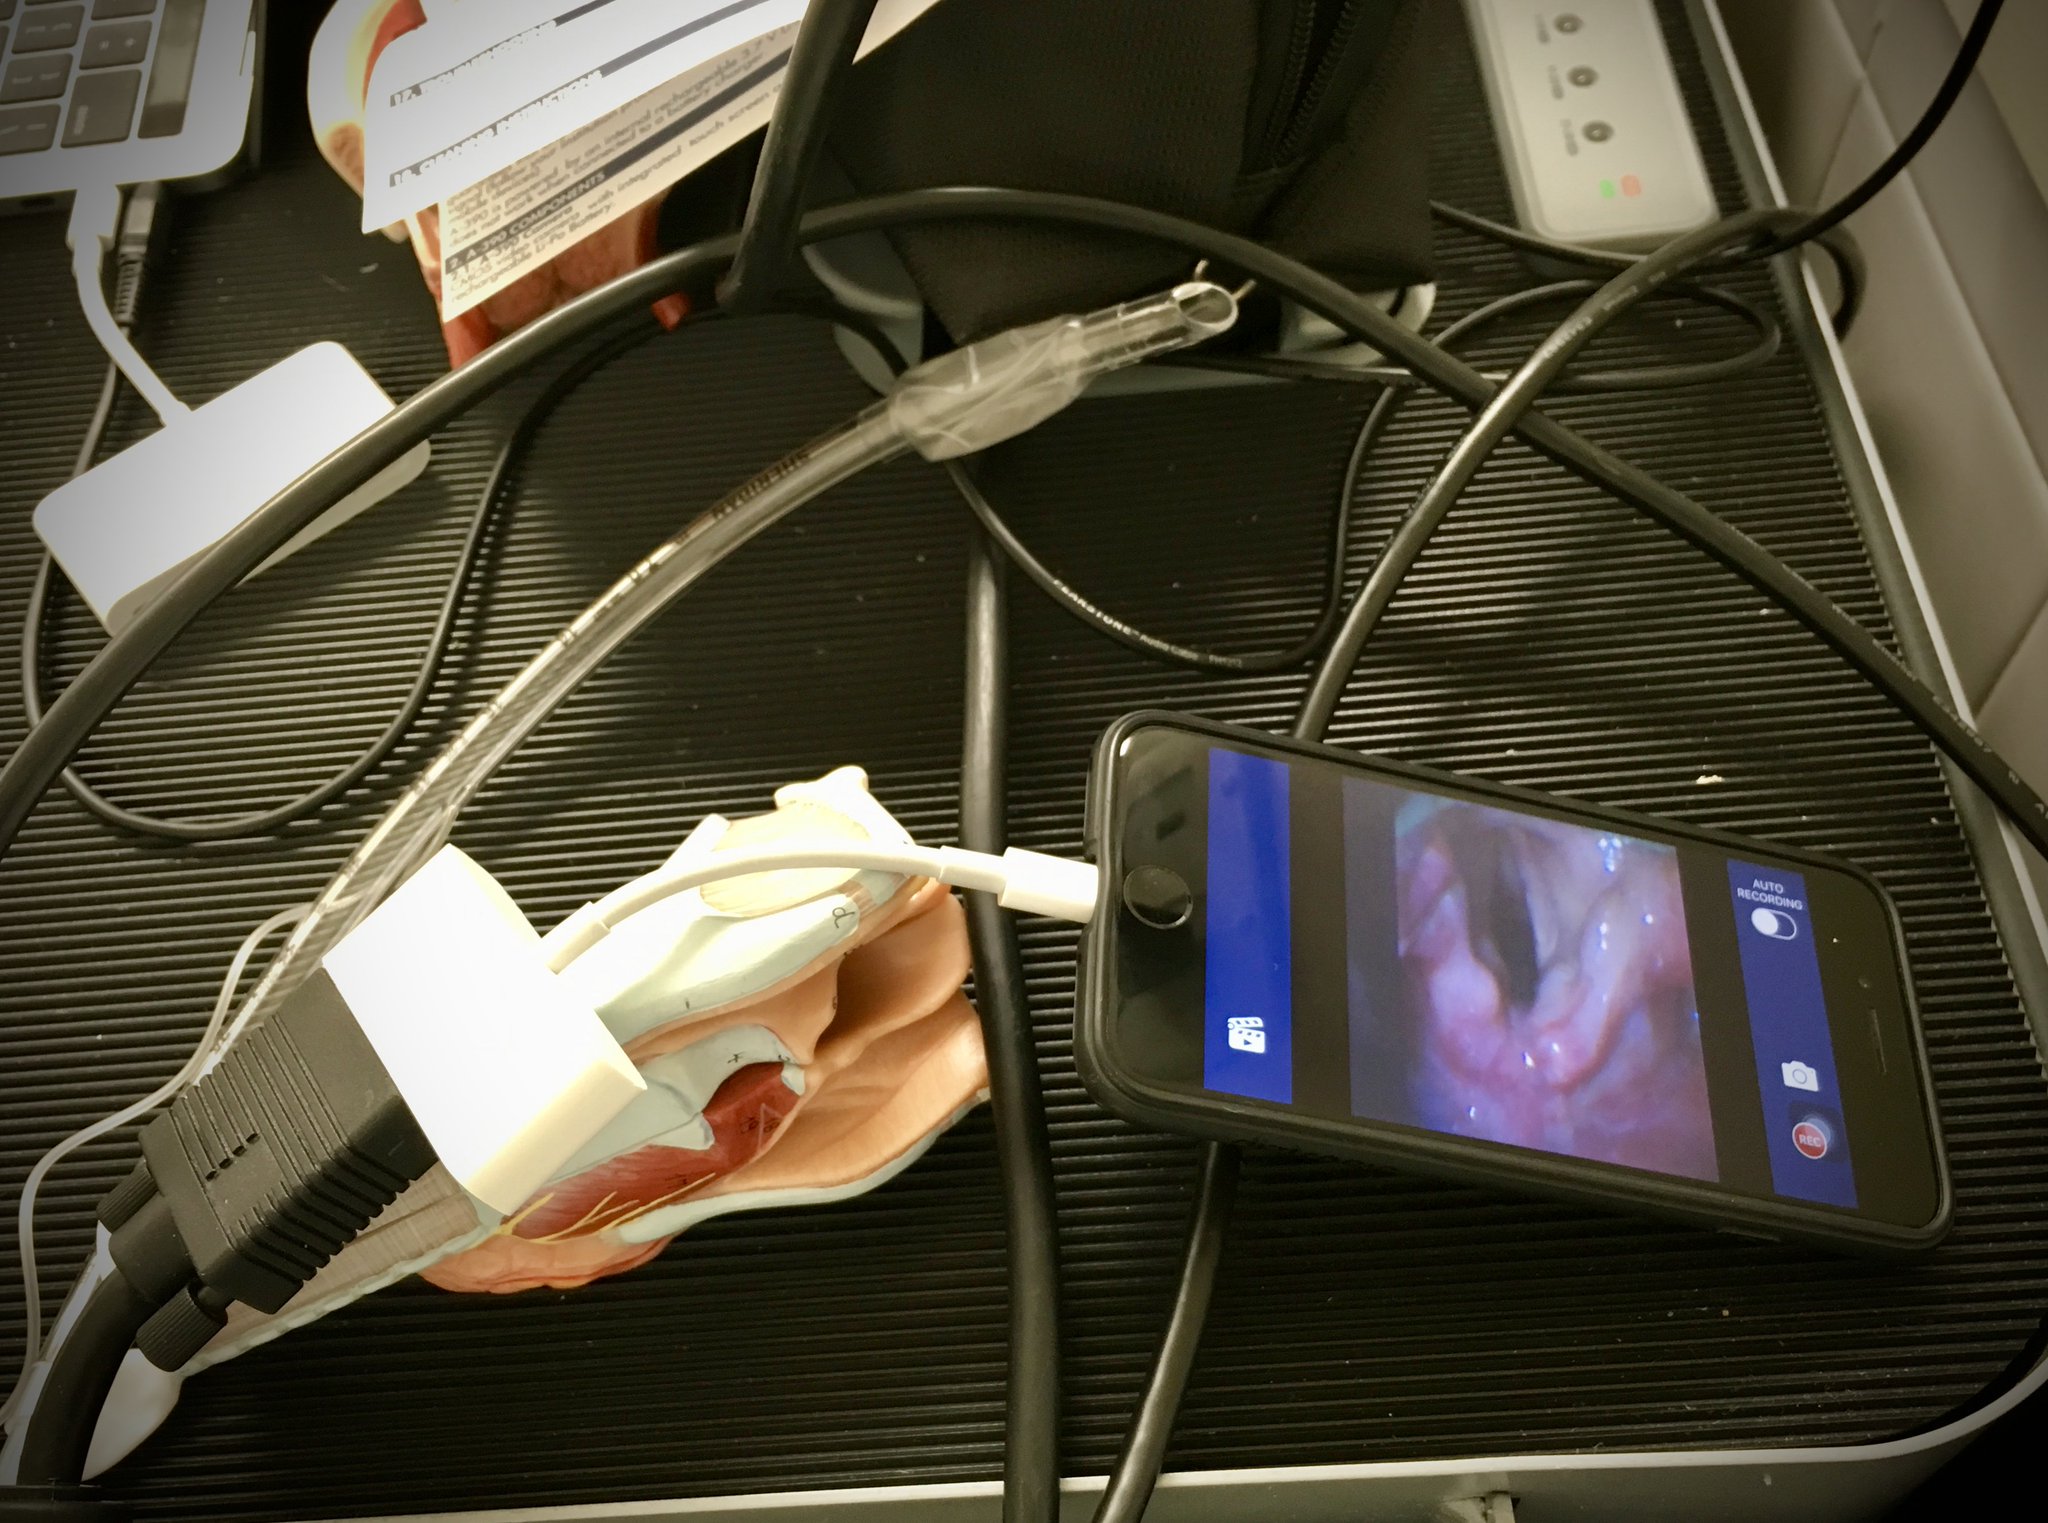 Repurposing old technology at #PAC2018 Trachea model holding up HDMI cable to iPhone throwing glottic images via new Airtraq camera to multiple screens for Airway course! @jducanto @gueromedico @ResusOnTheRoad @jameshorowitzmd @Doclief See u all next year! https://t.co/1eIkRq6mVI